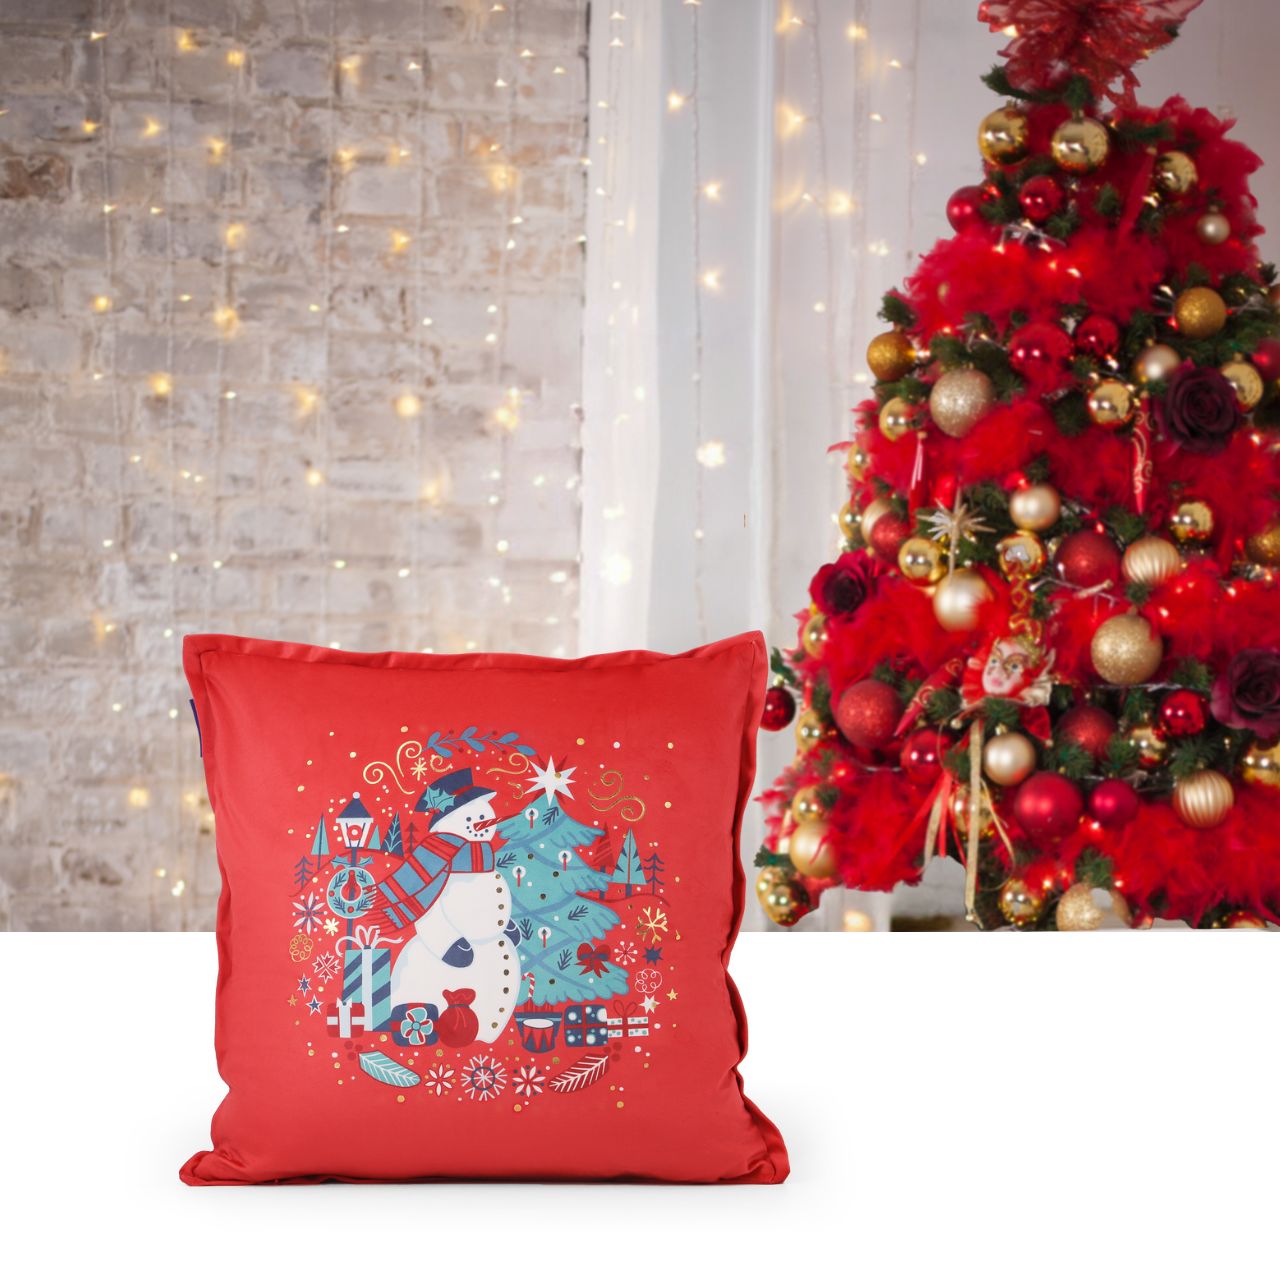 Christmas Cushion - Snowman by Tipperary Crystal  Gather your loved ones for a holiday celebration to remember. We just Love Christmas! The festive season, the giving of gifts, creating memories and being together with family and loved ones.